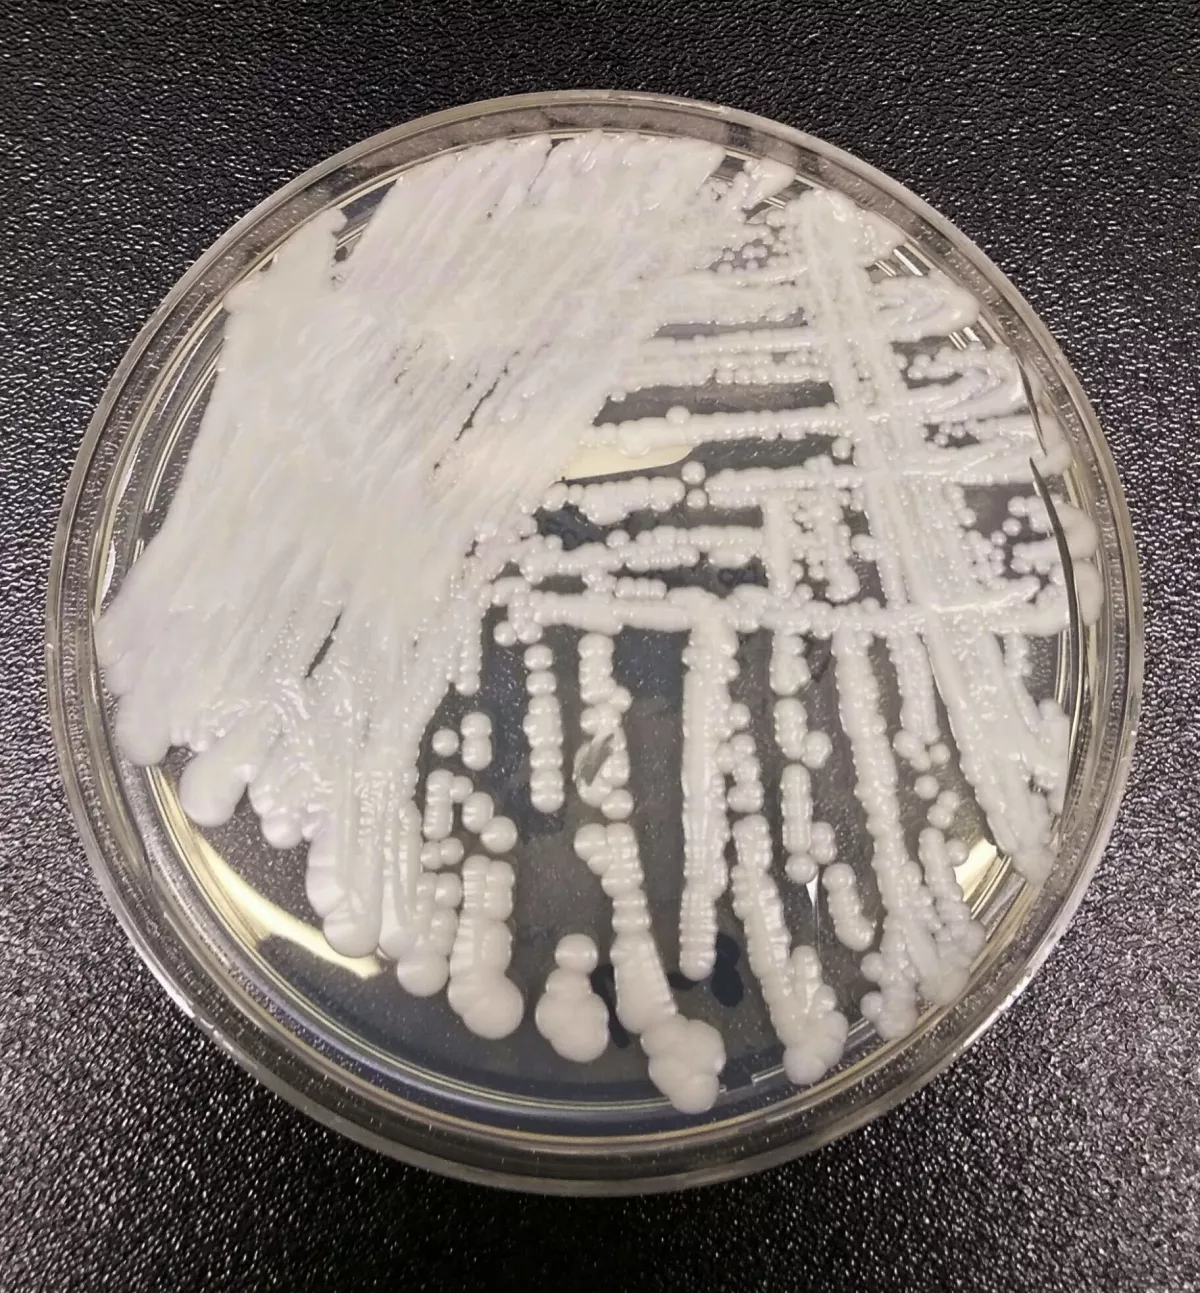 A strain of Candida auris cultured in a Centers for Disease Control and Prevention laboratory. The CDC reports that the fungus is causing infections in healthcare facilities.Photo: Shawn Lockhart / Associated Press